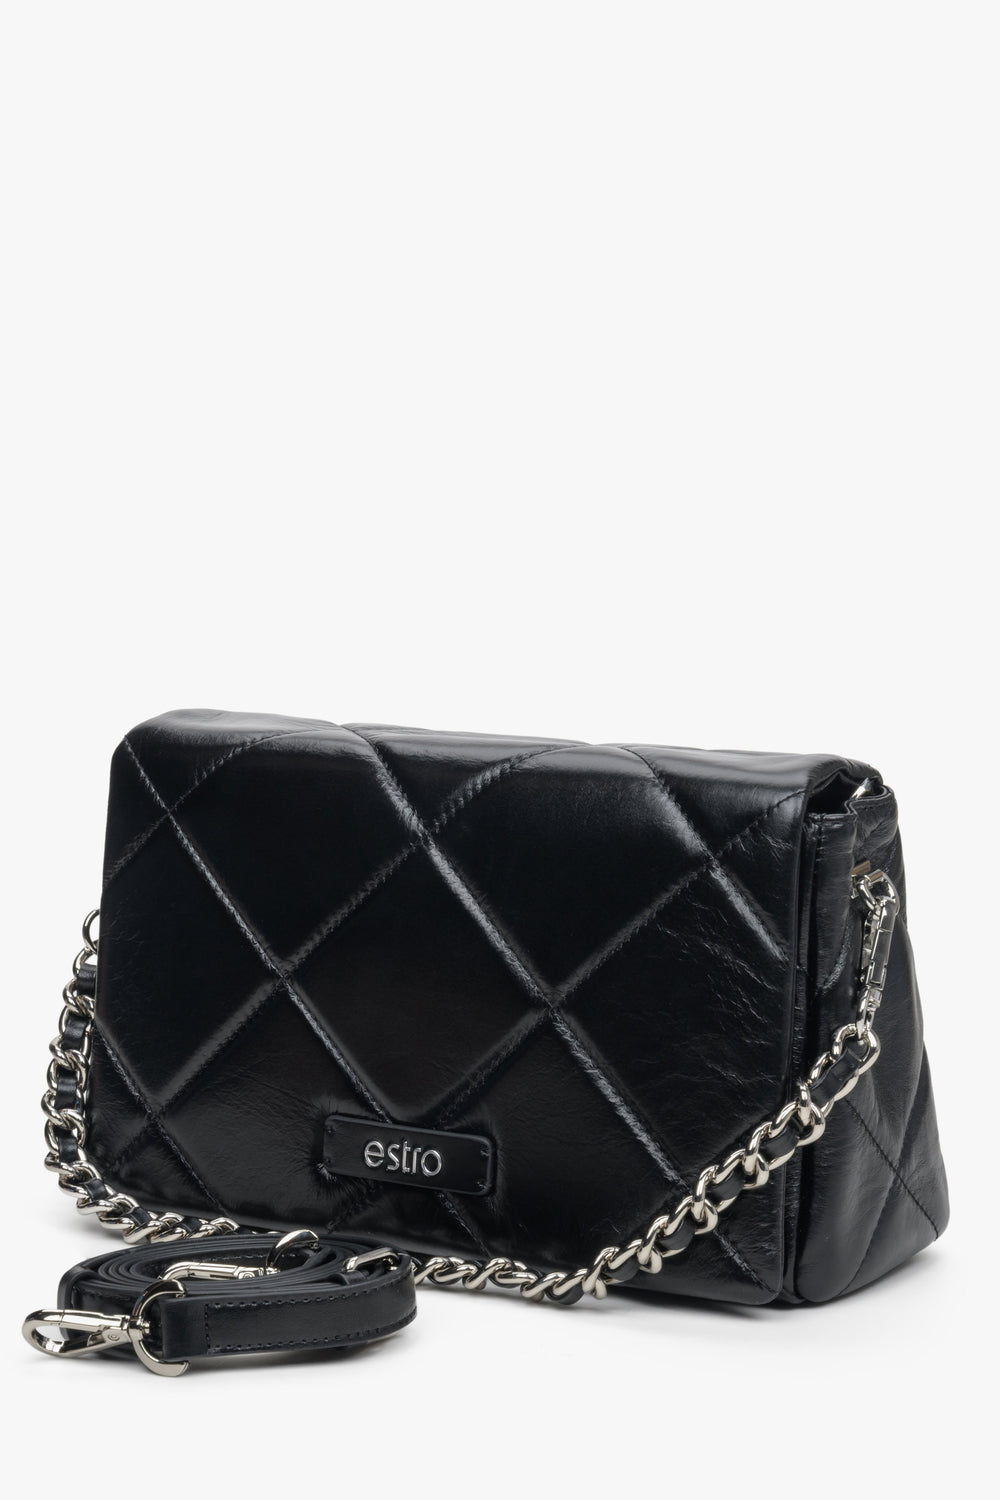 Estro women's bag made of genuine leather in black colour with a chain strap.